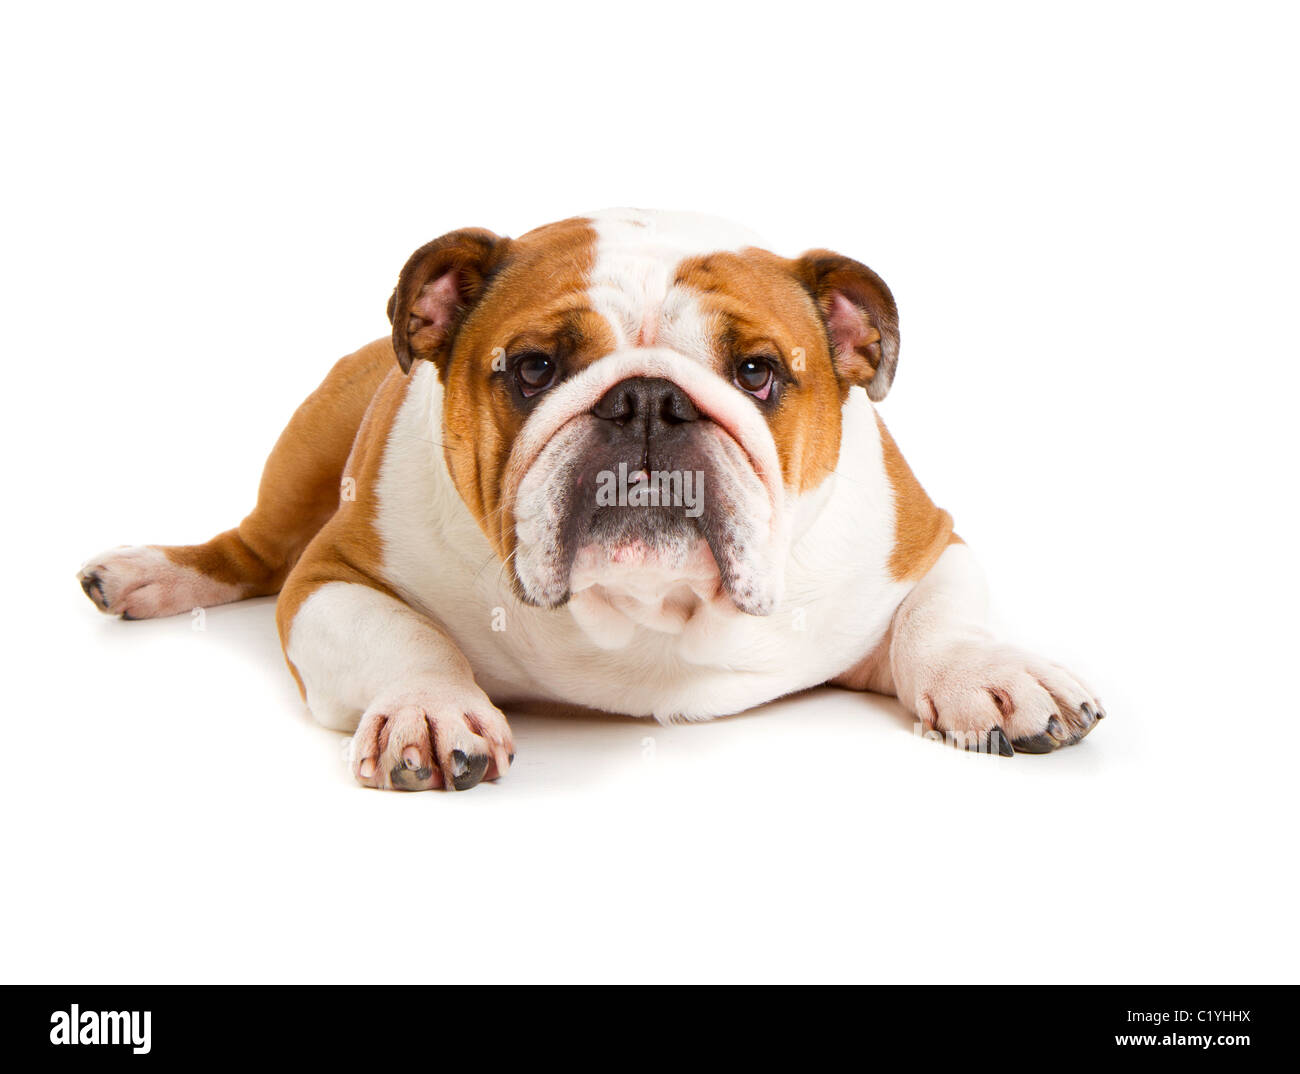 Dog of winston churchill Cut Out Stock Images & Pictures - Alamy